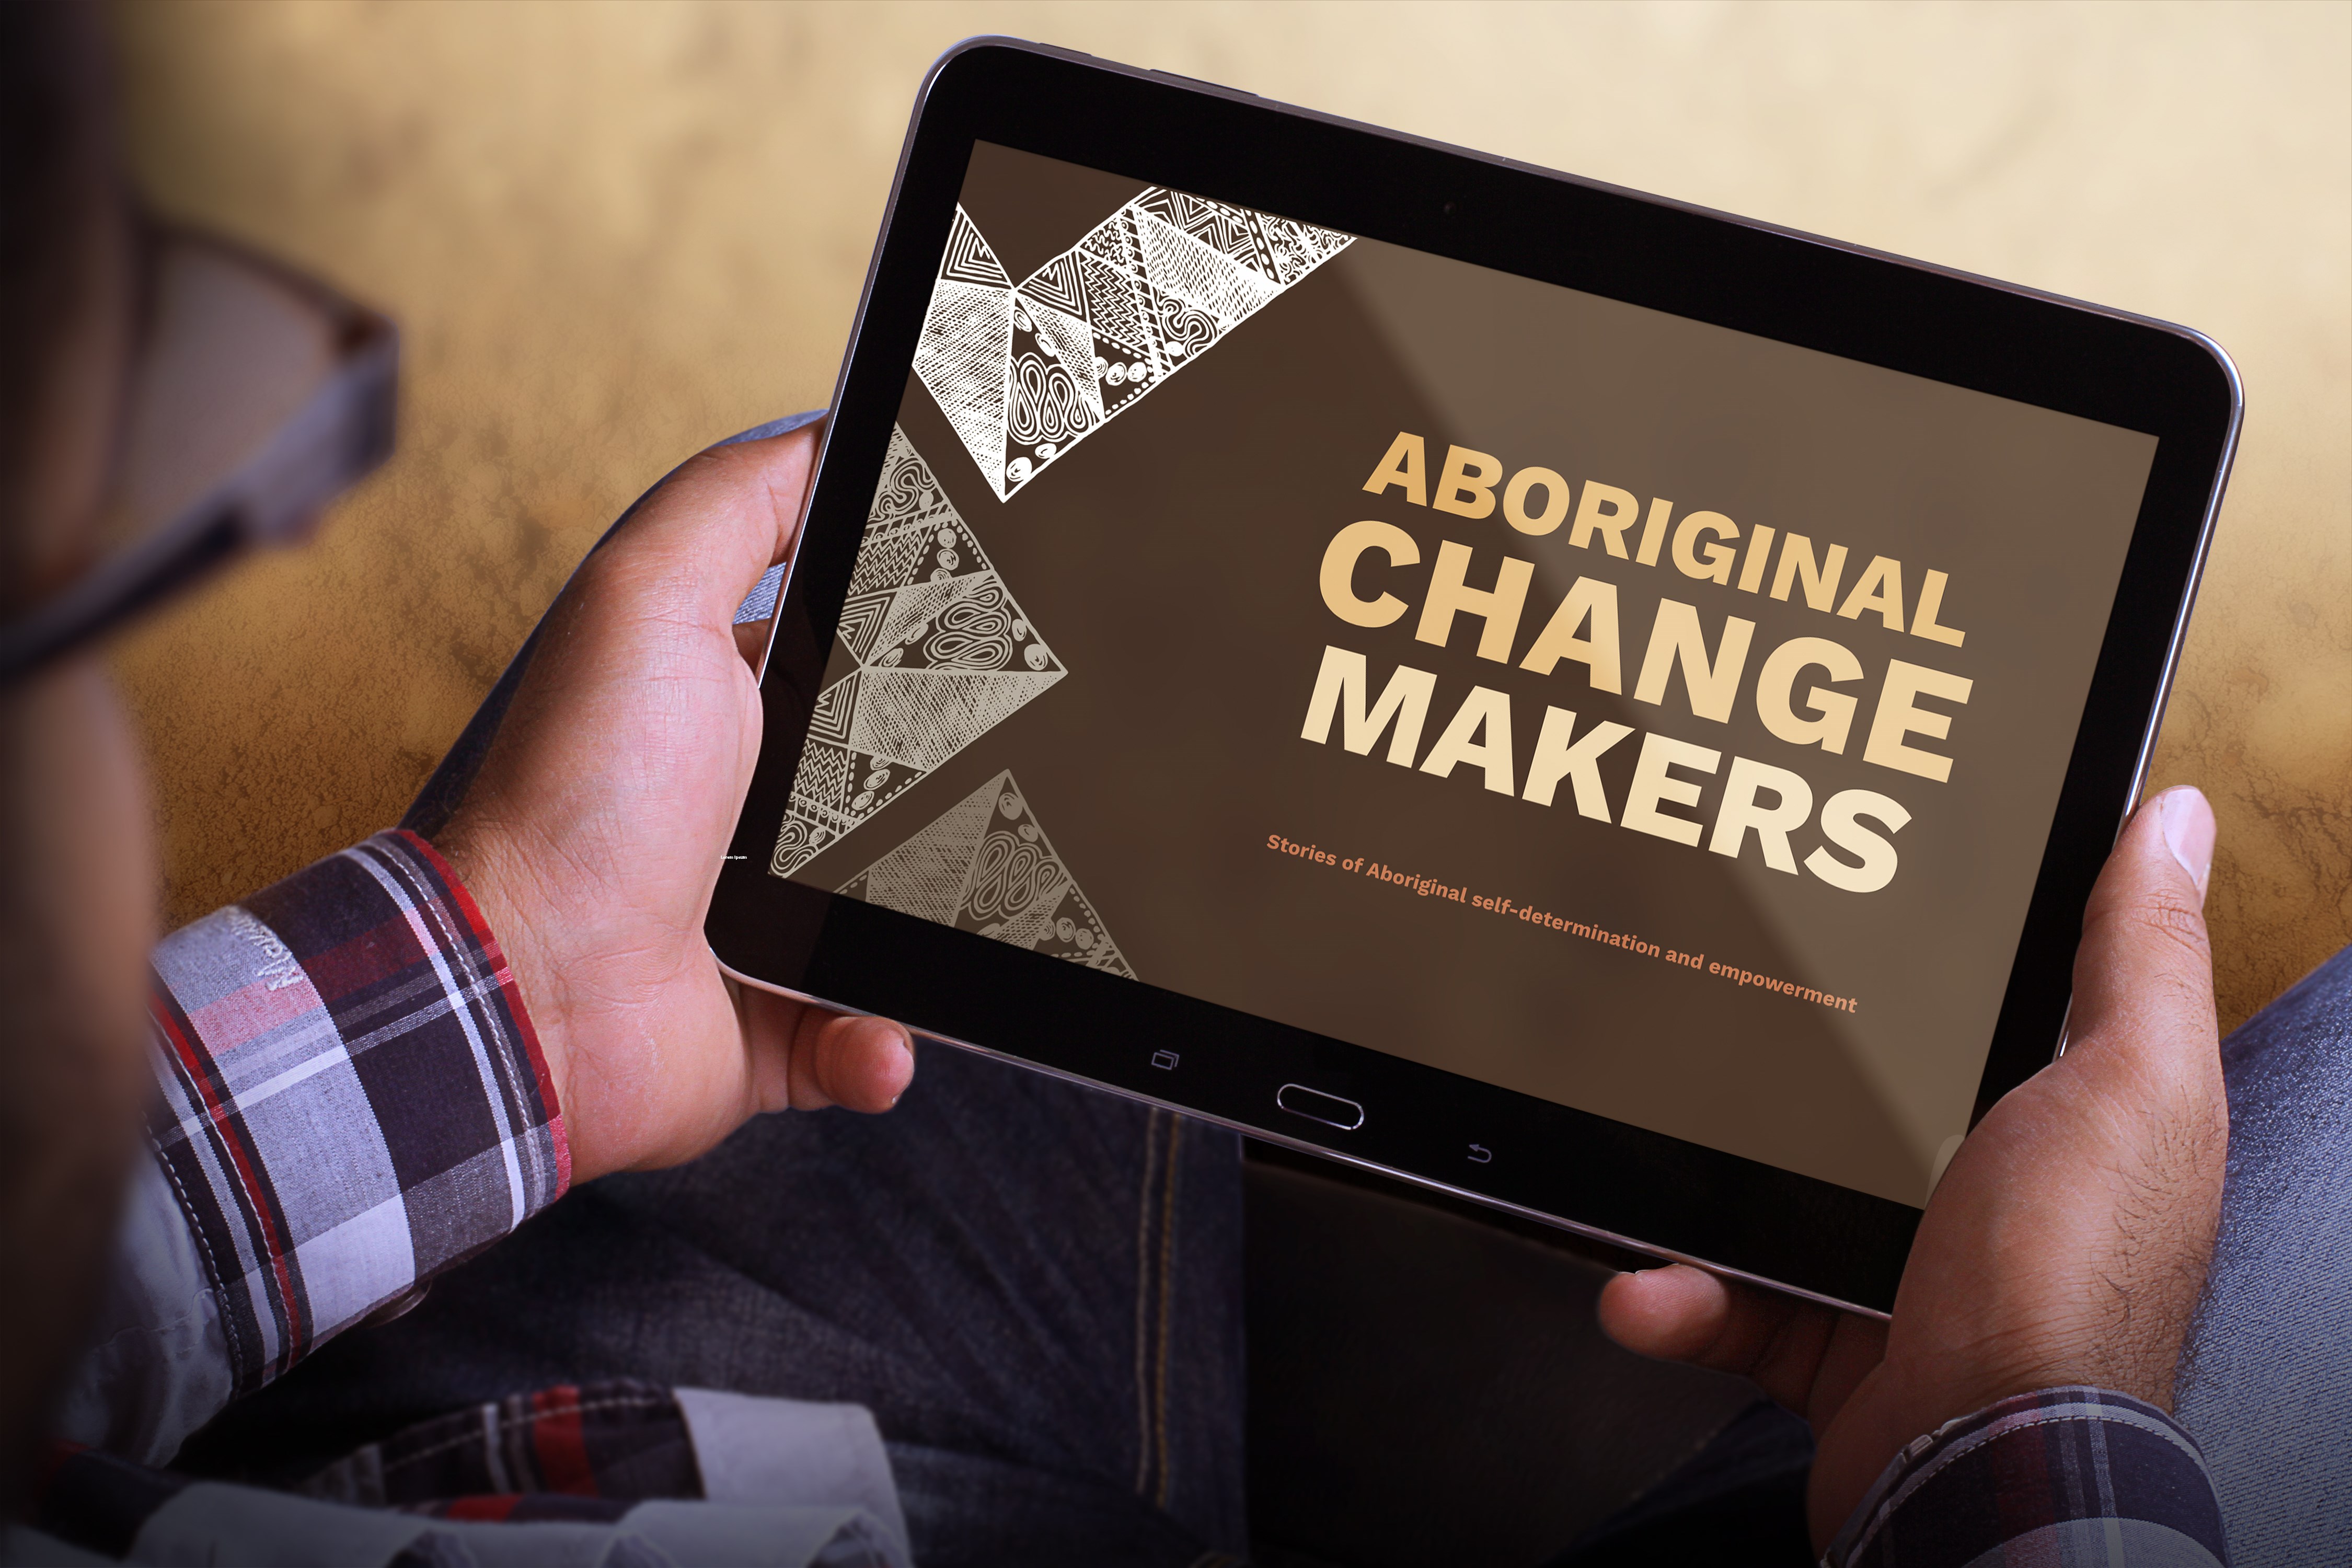 This new resource shares aspects of Aboriginal history that are little known in the broader community.